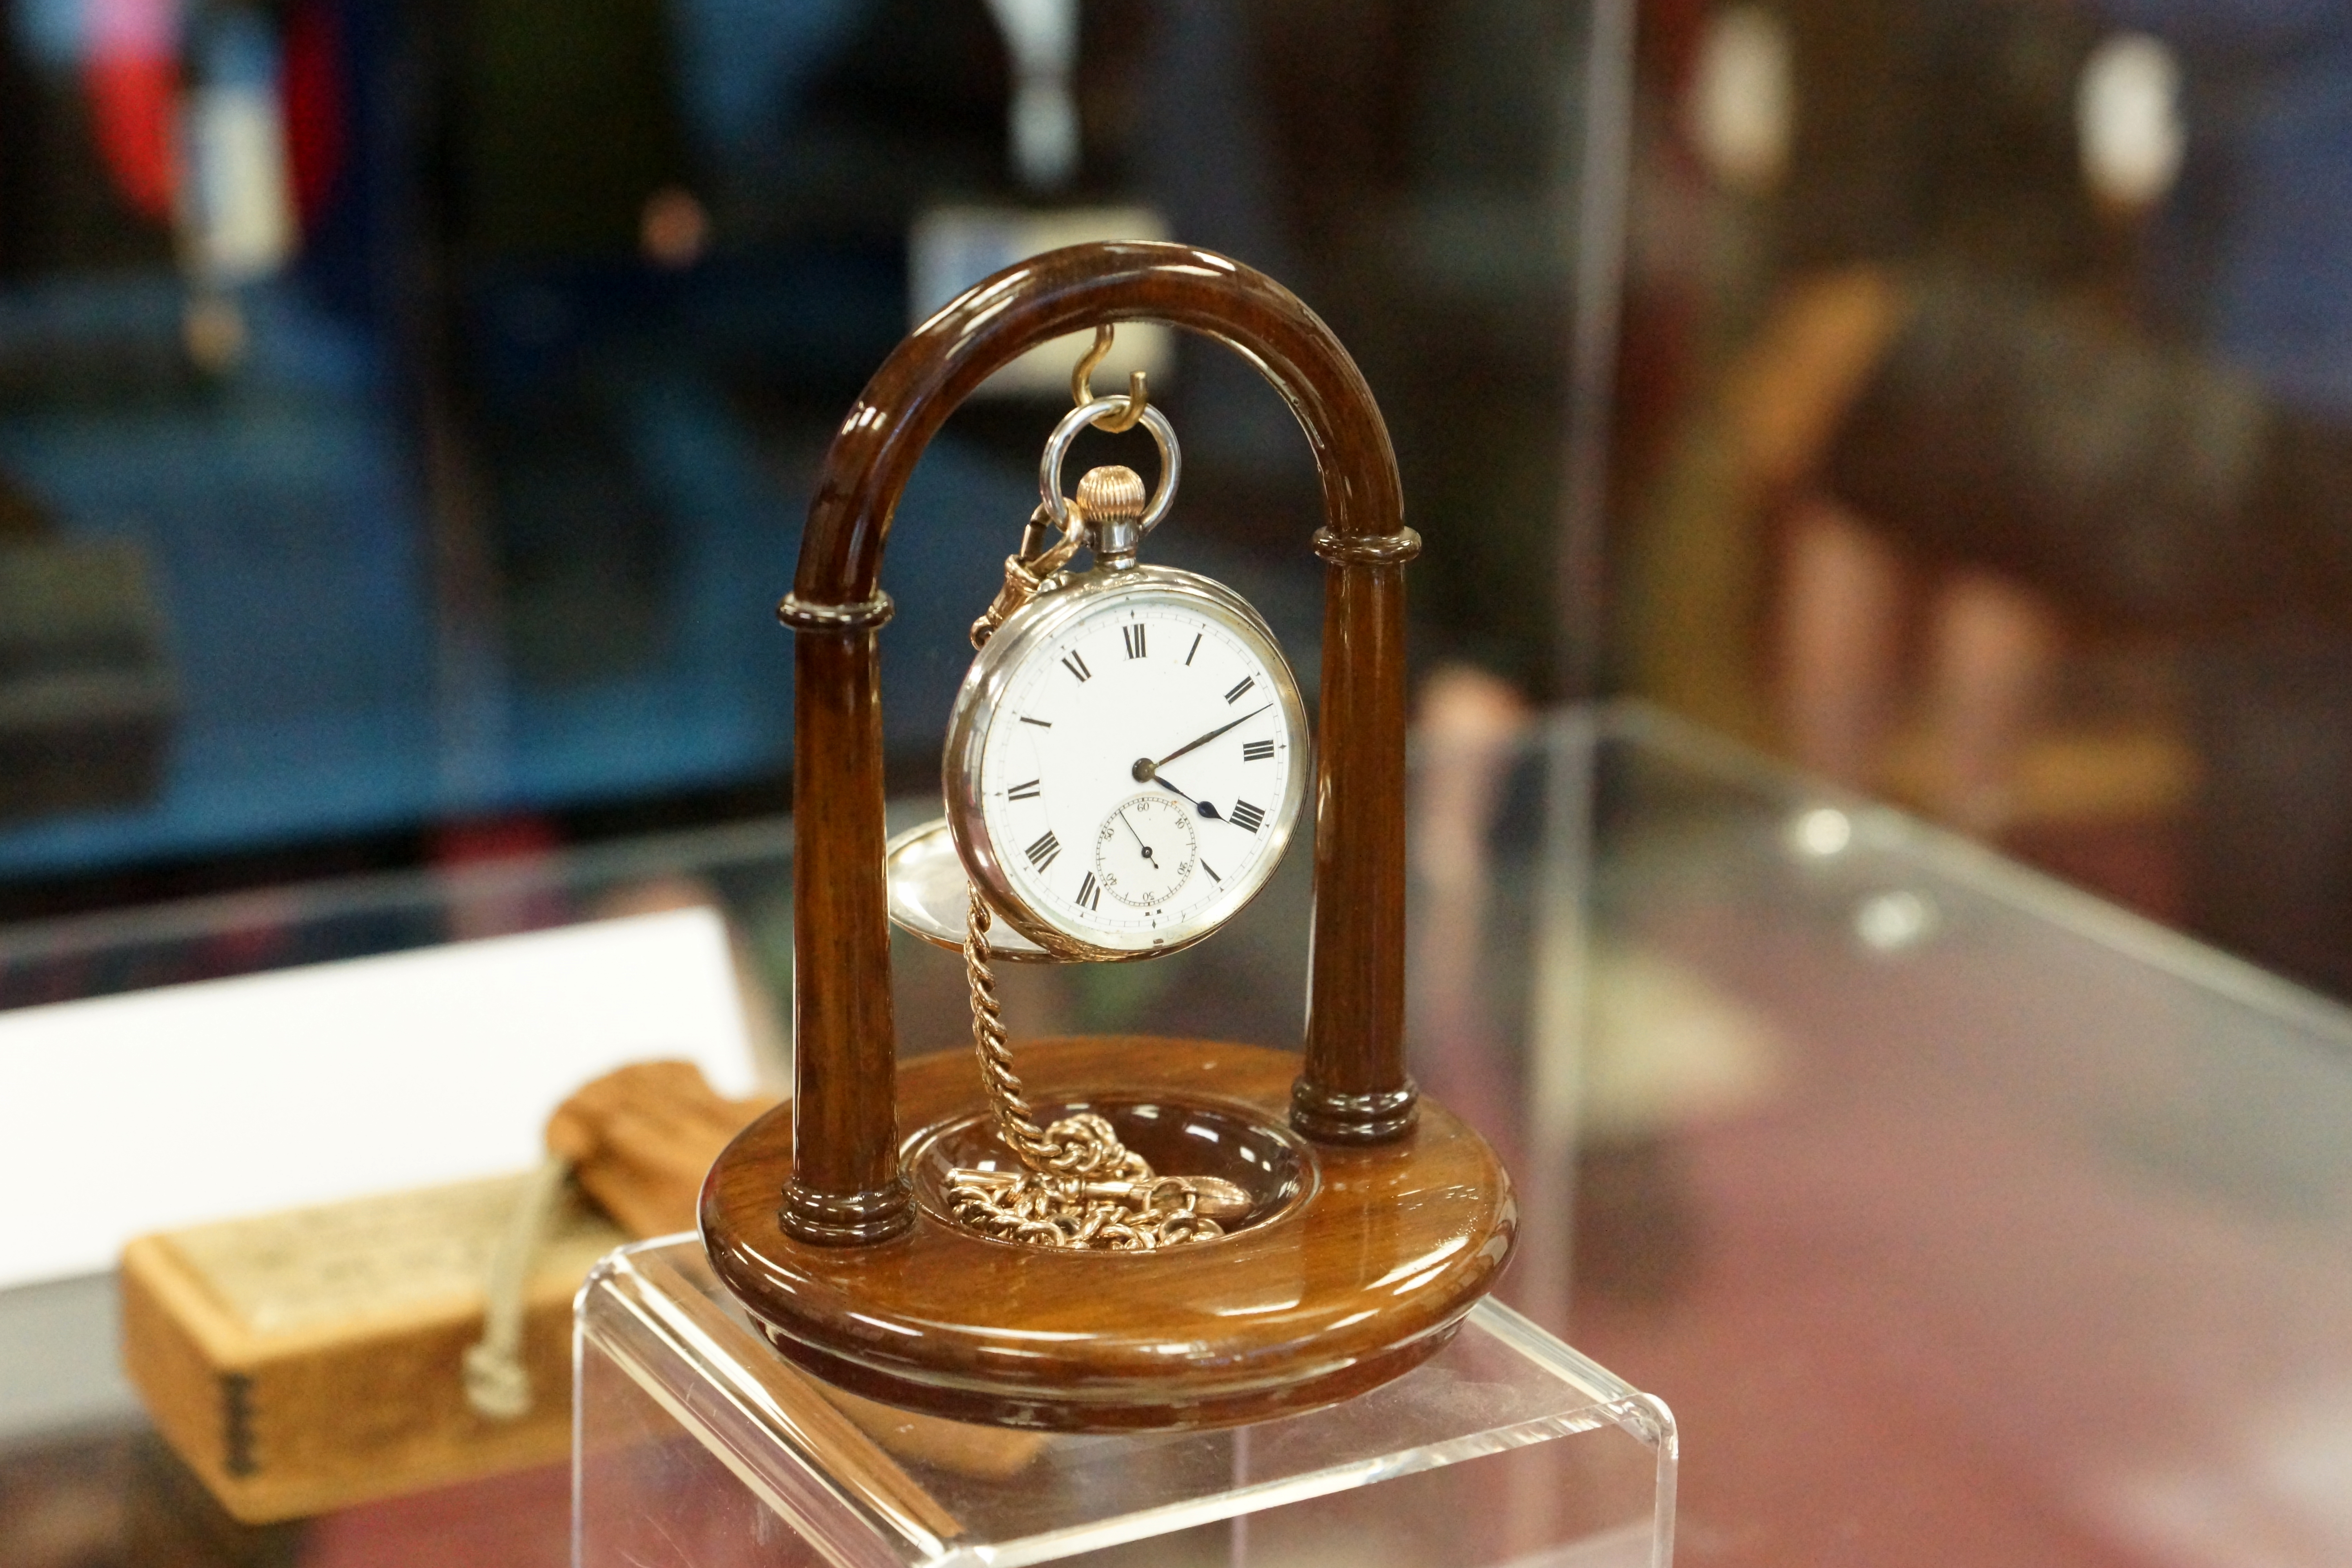 A pocket watch previously gifted to a seaman who saved a countess' life